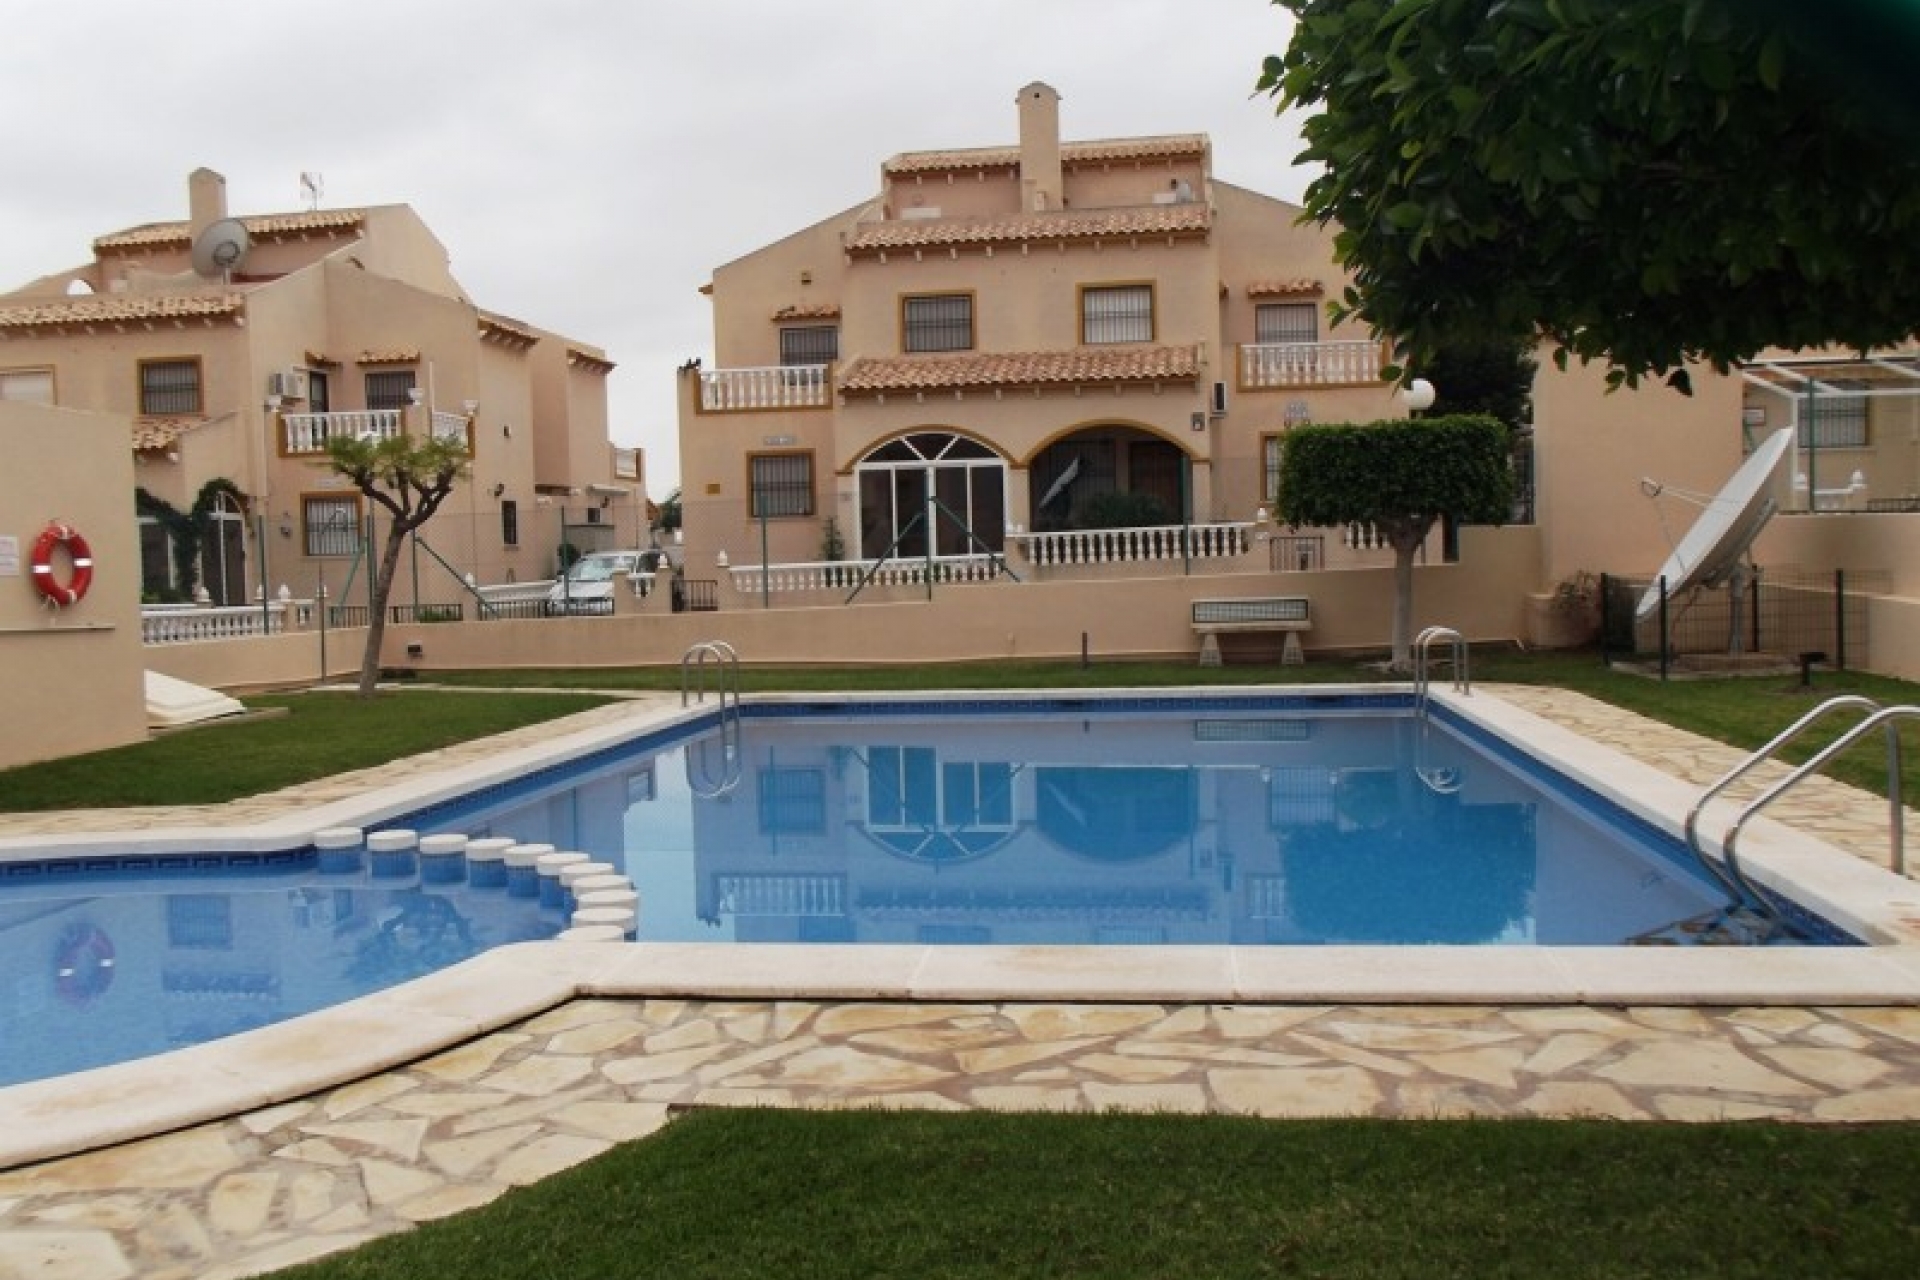 Bargain property for sale Spain cheap Costa blanca